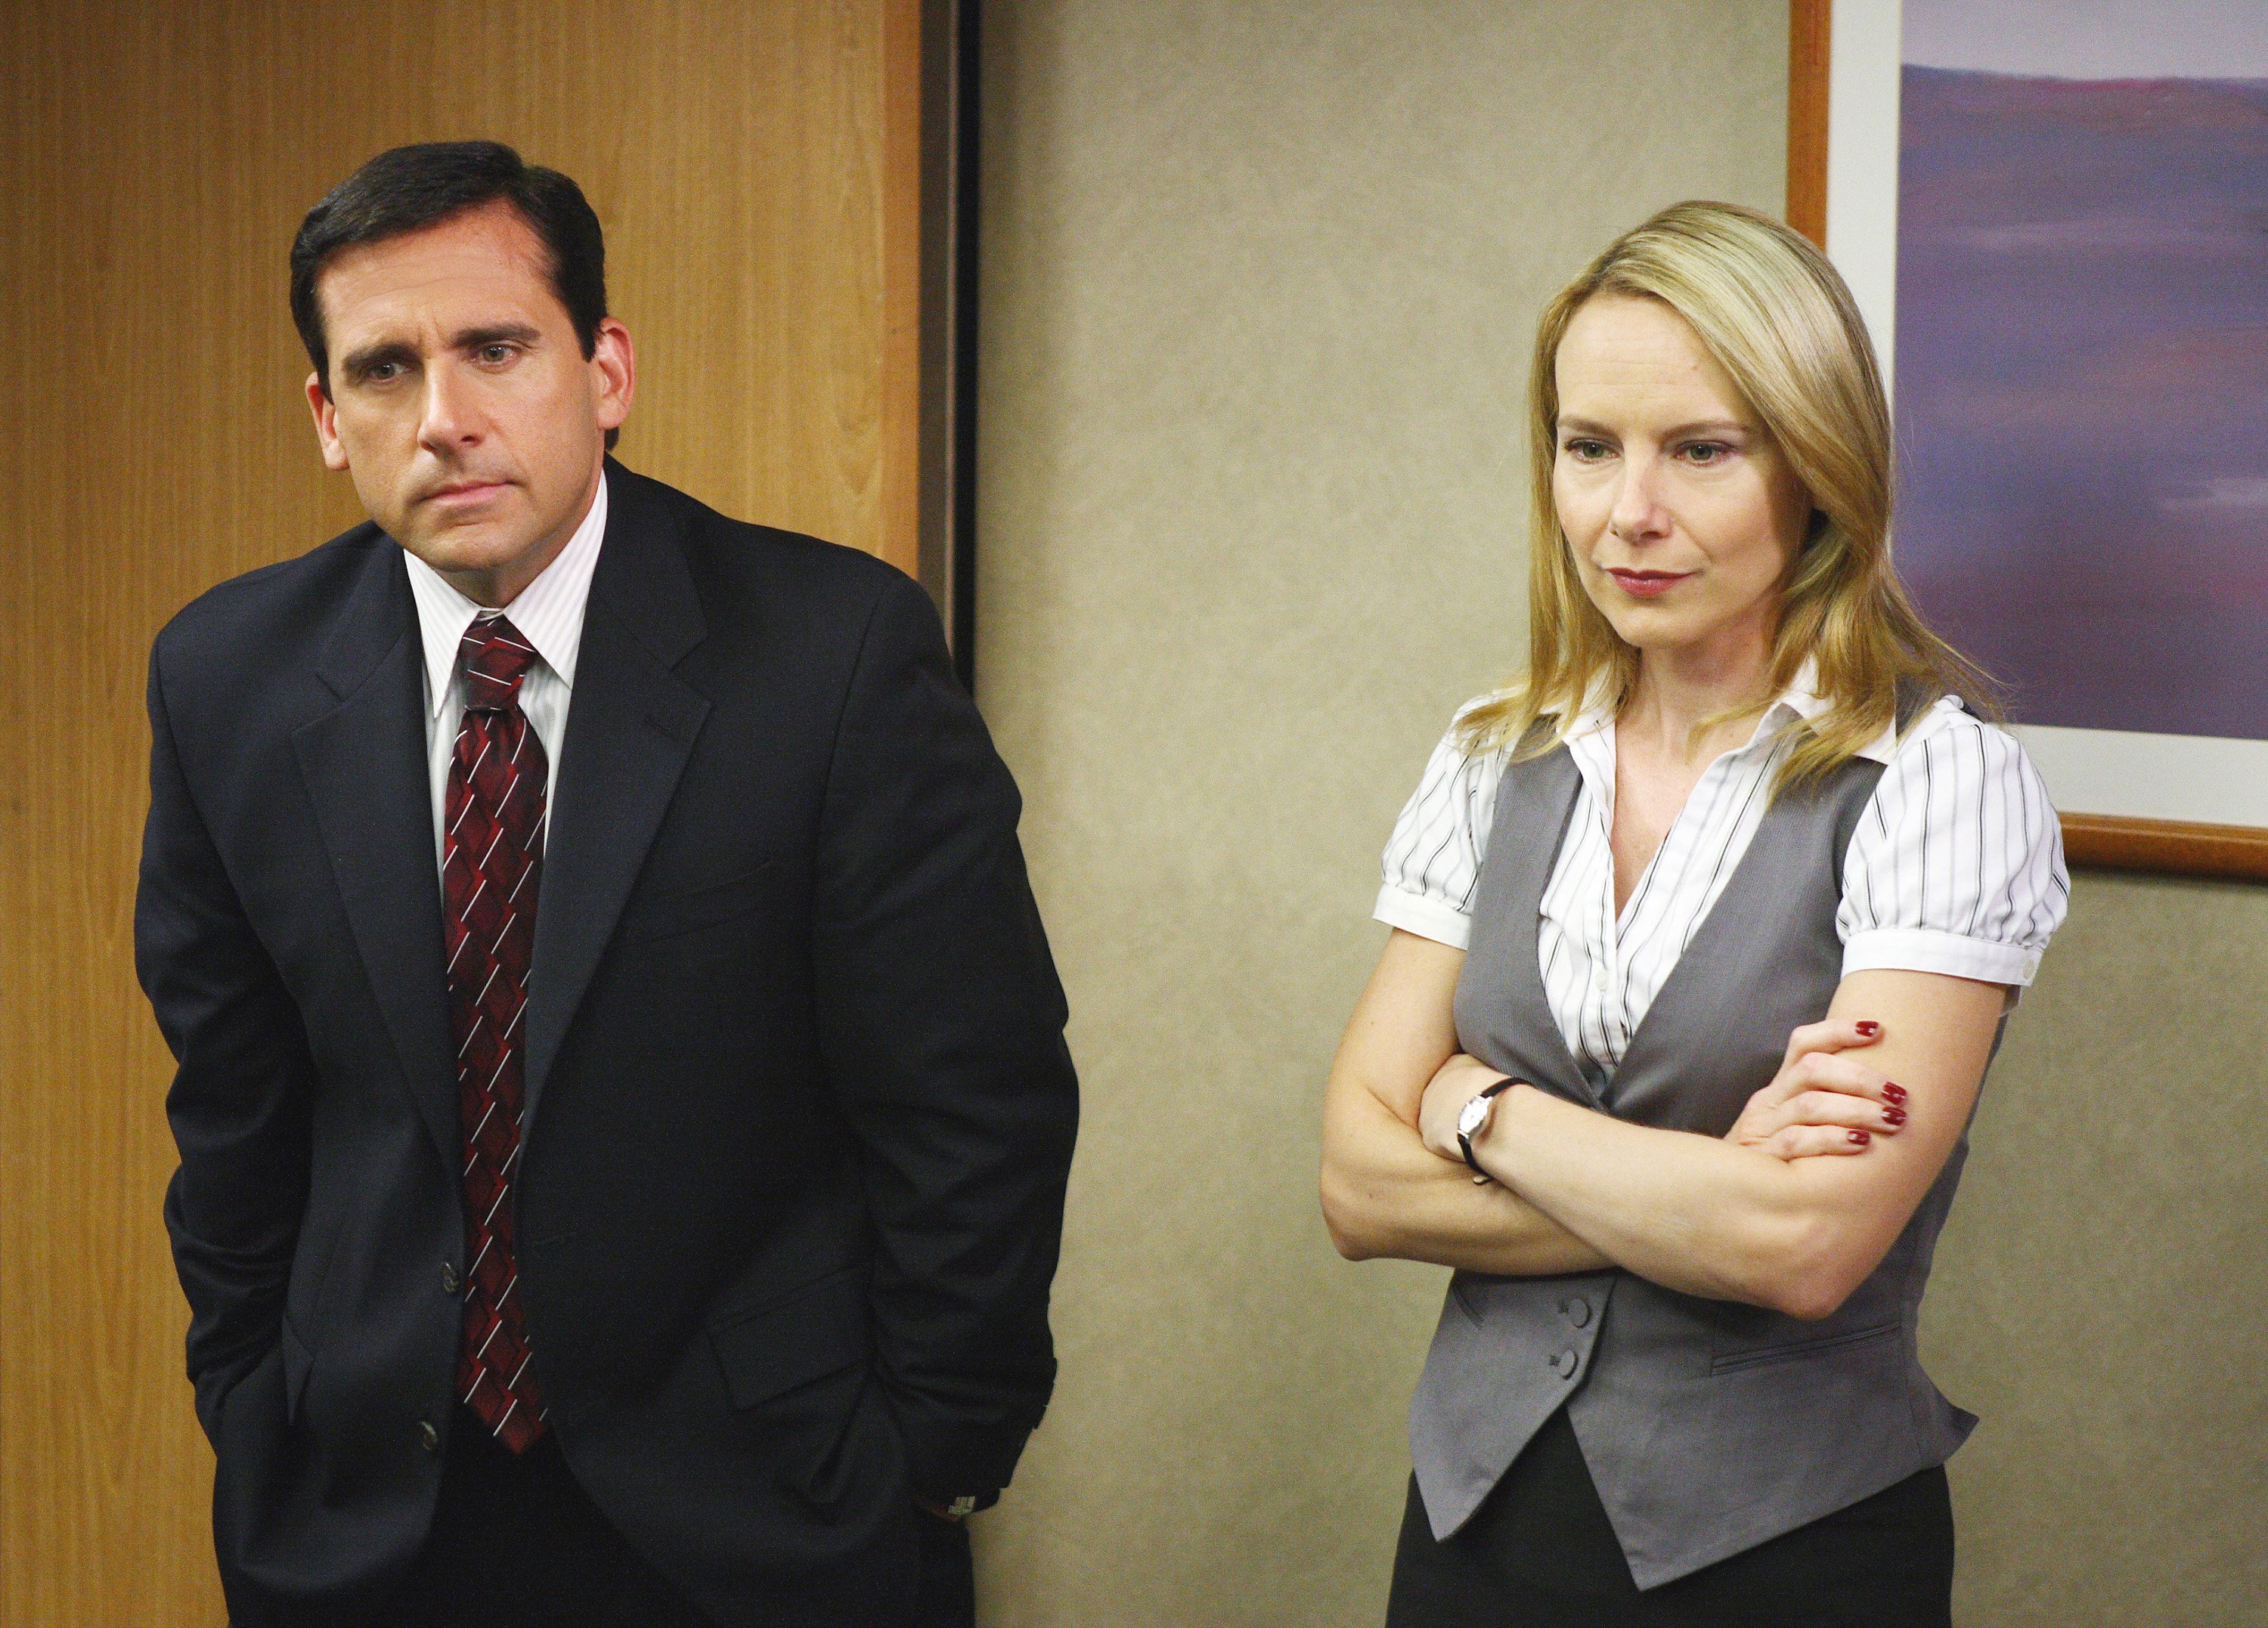 Steve Carell as Michael Scott and Amy Ryan as Holly Flax in 'The Office' episode 'Business Ethics'